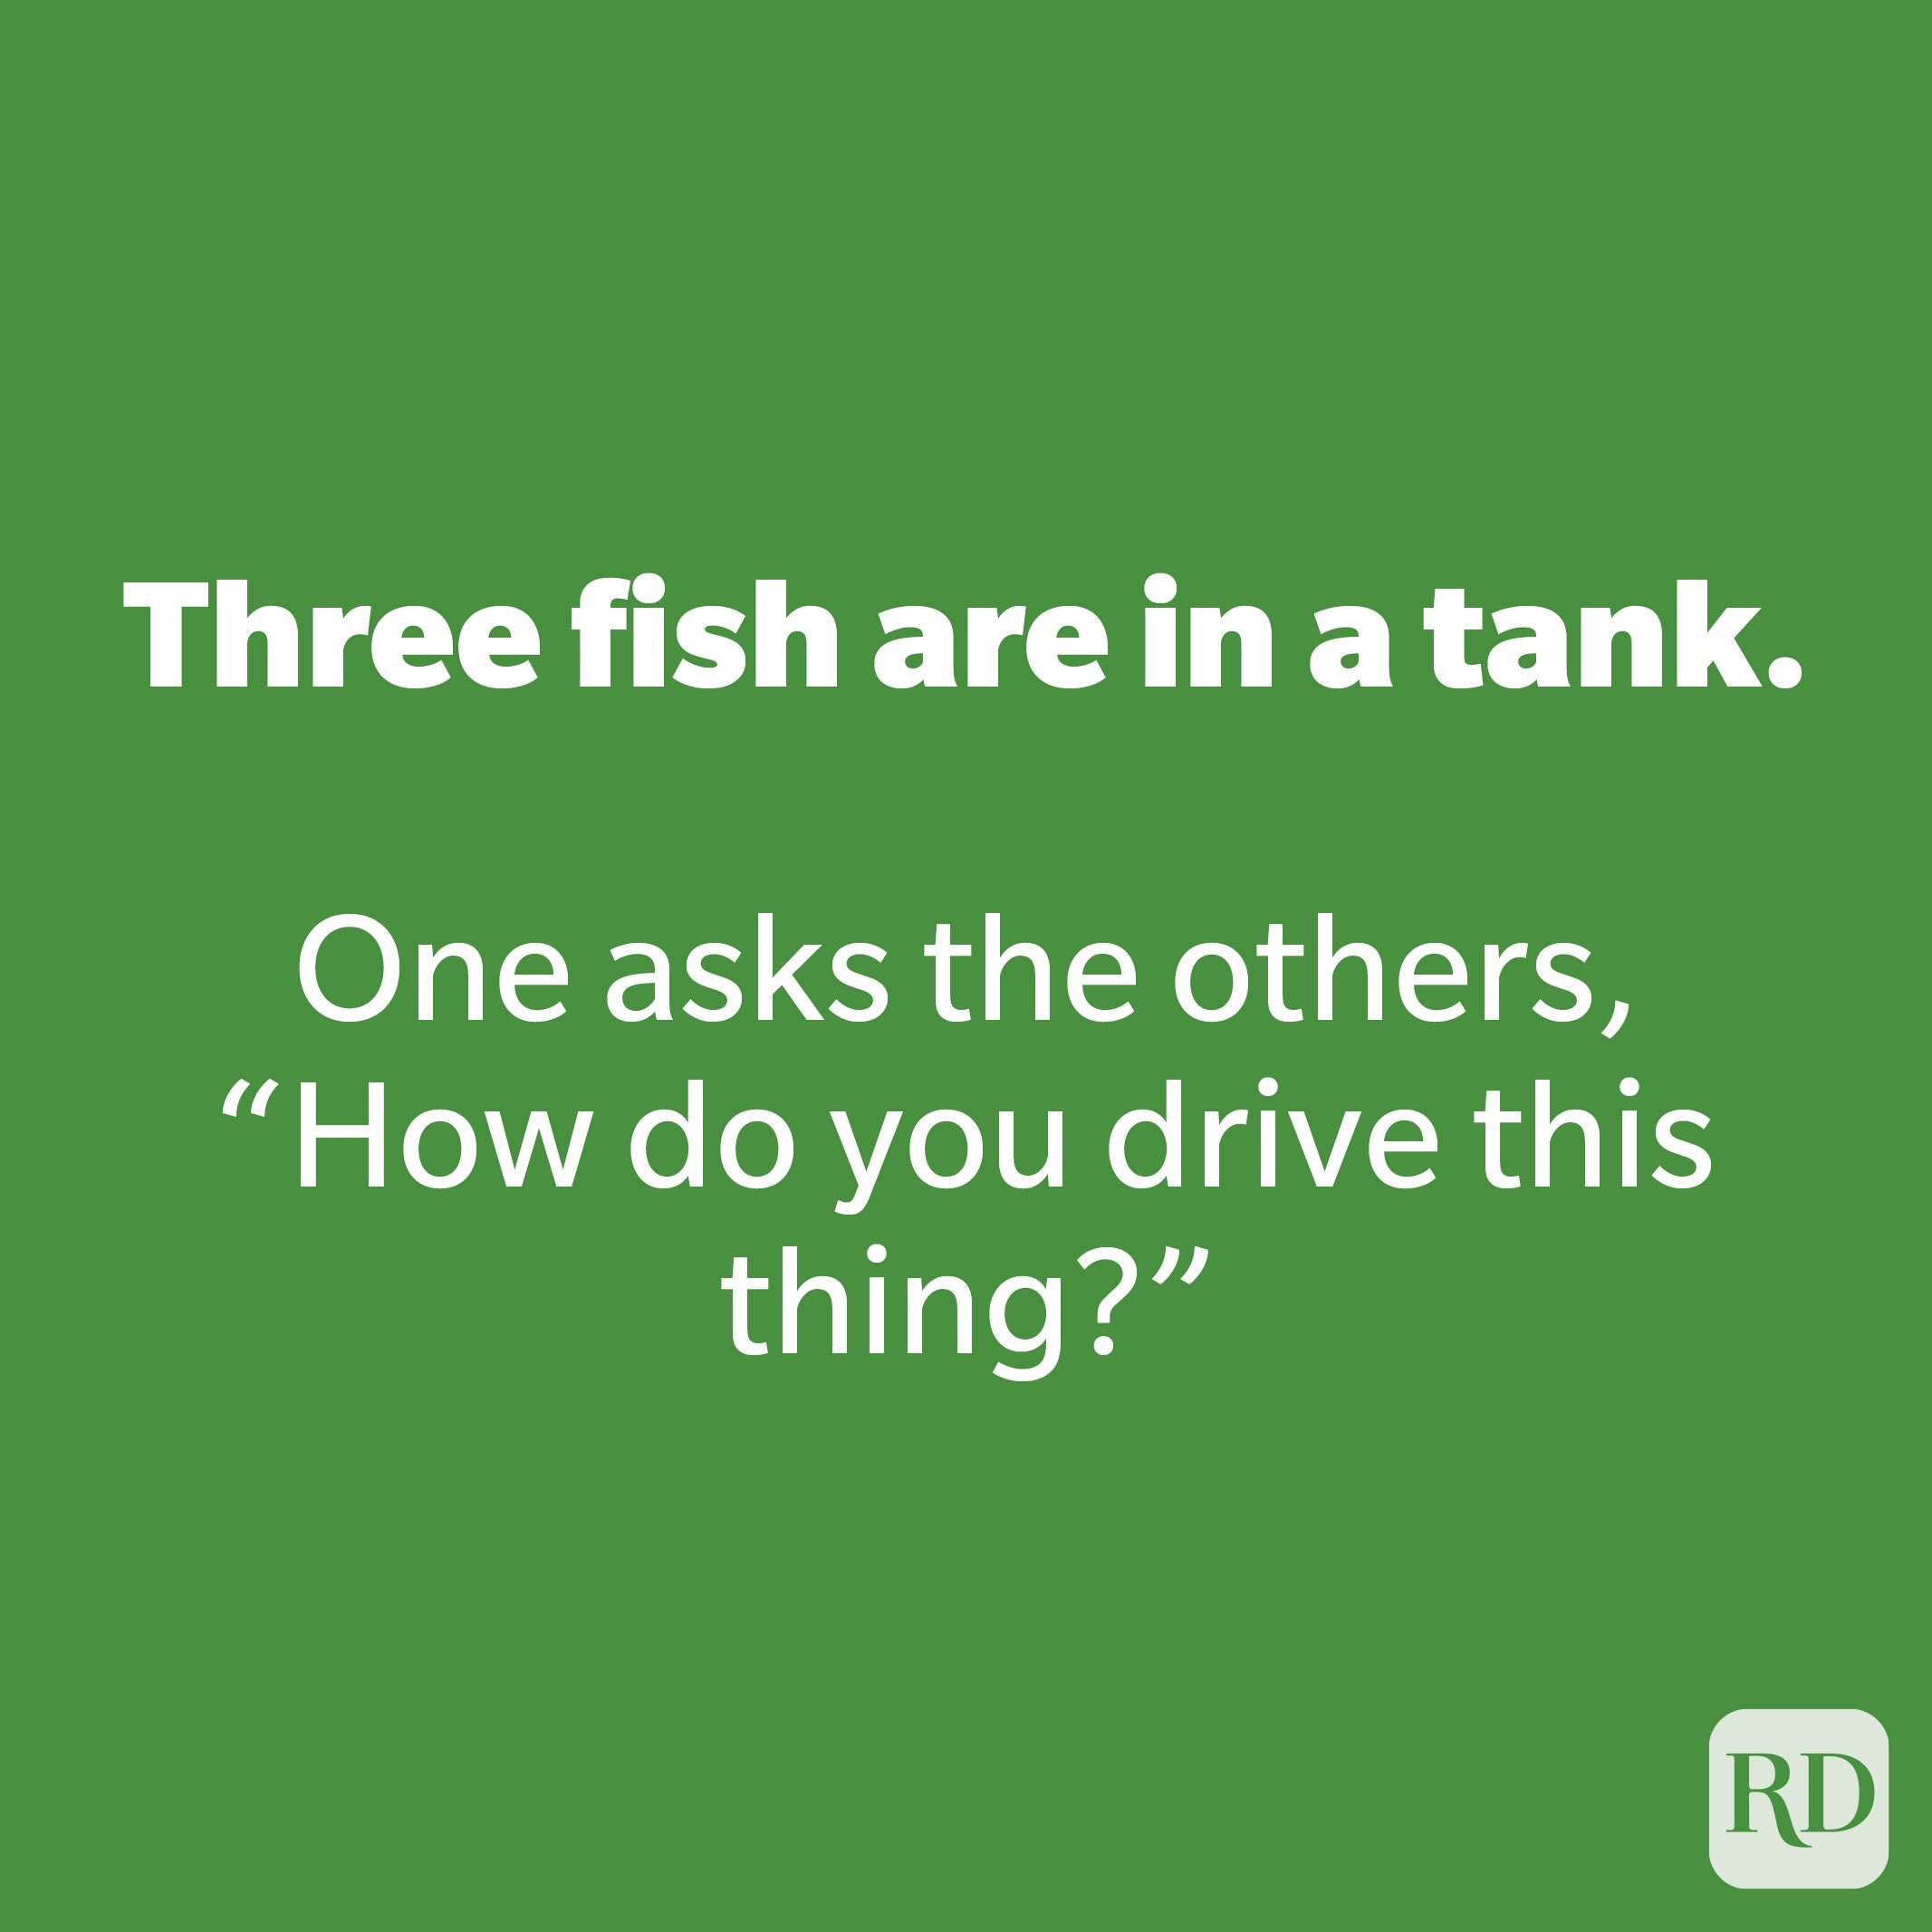 Three fish are in a tank.